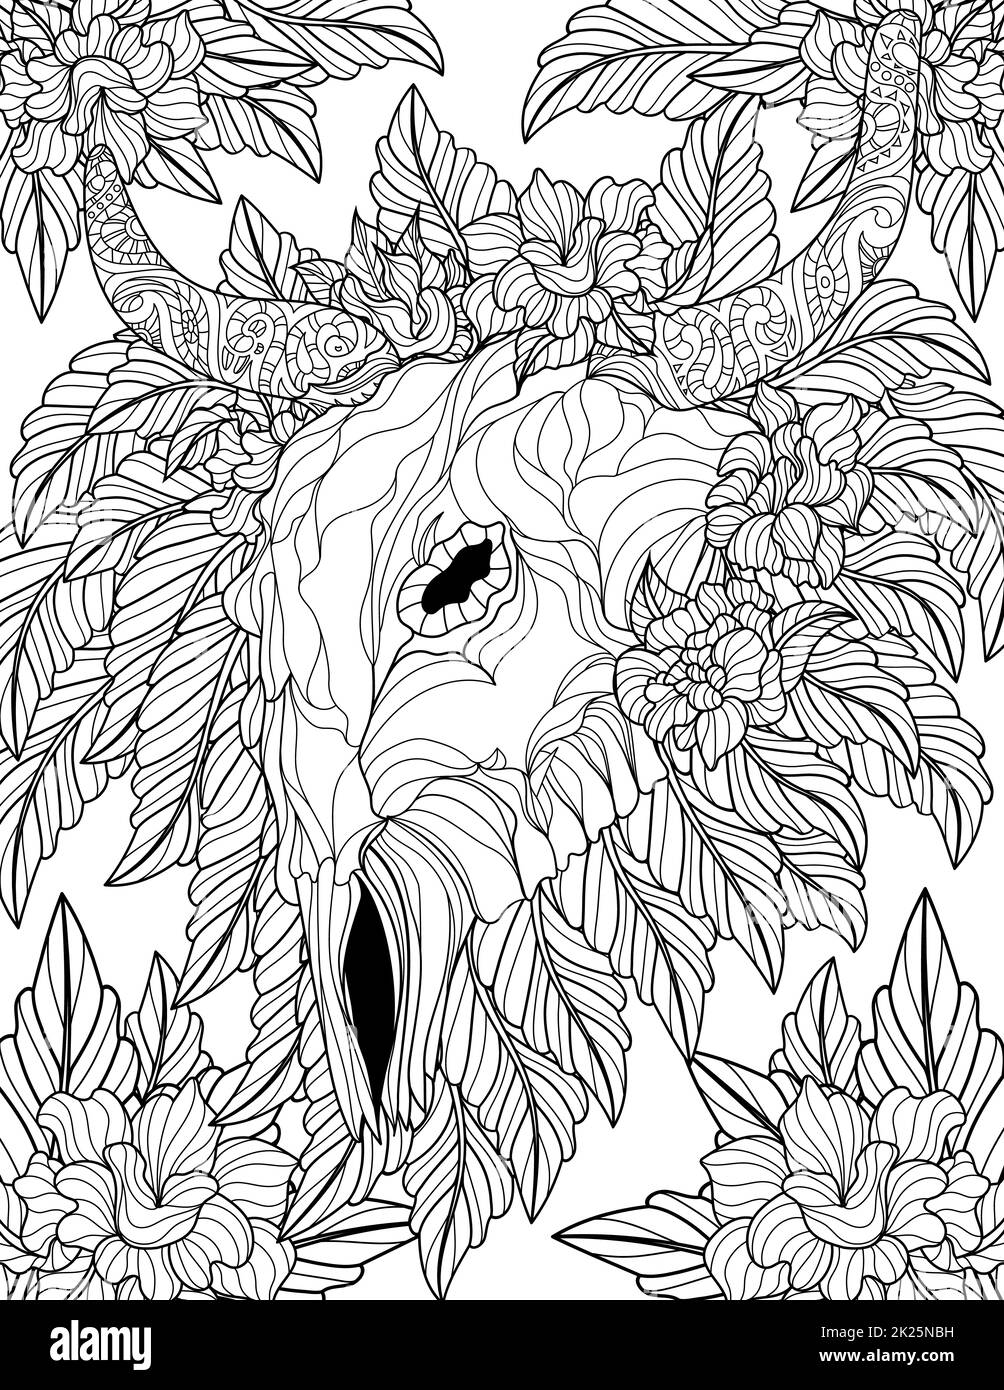 Dead Bull Skull With Long Horns Surrounded With Flowers Line Drawing For Coloring Book Stock Photo